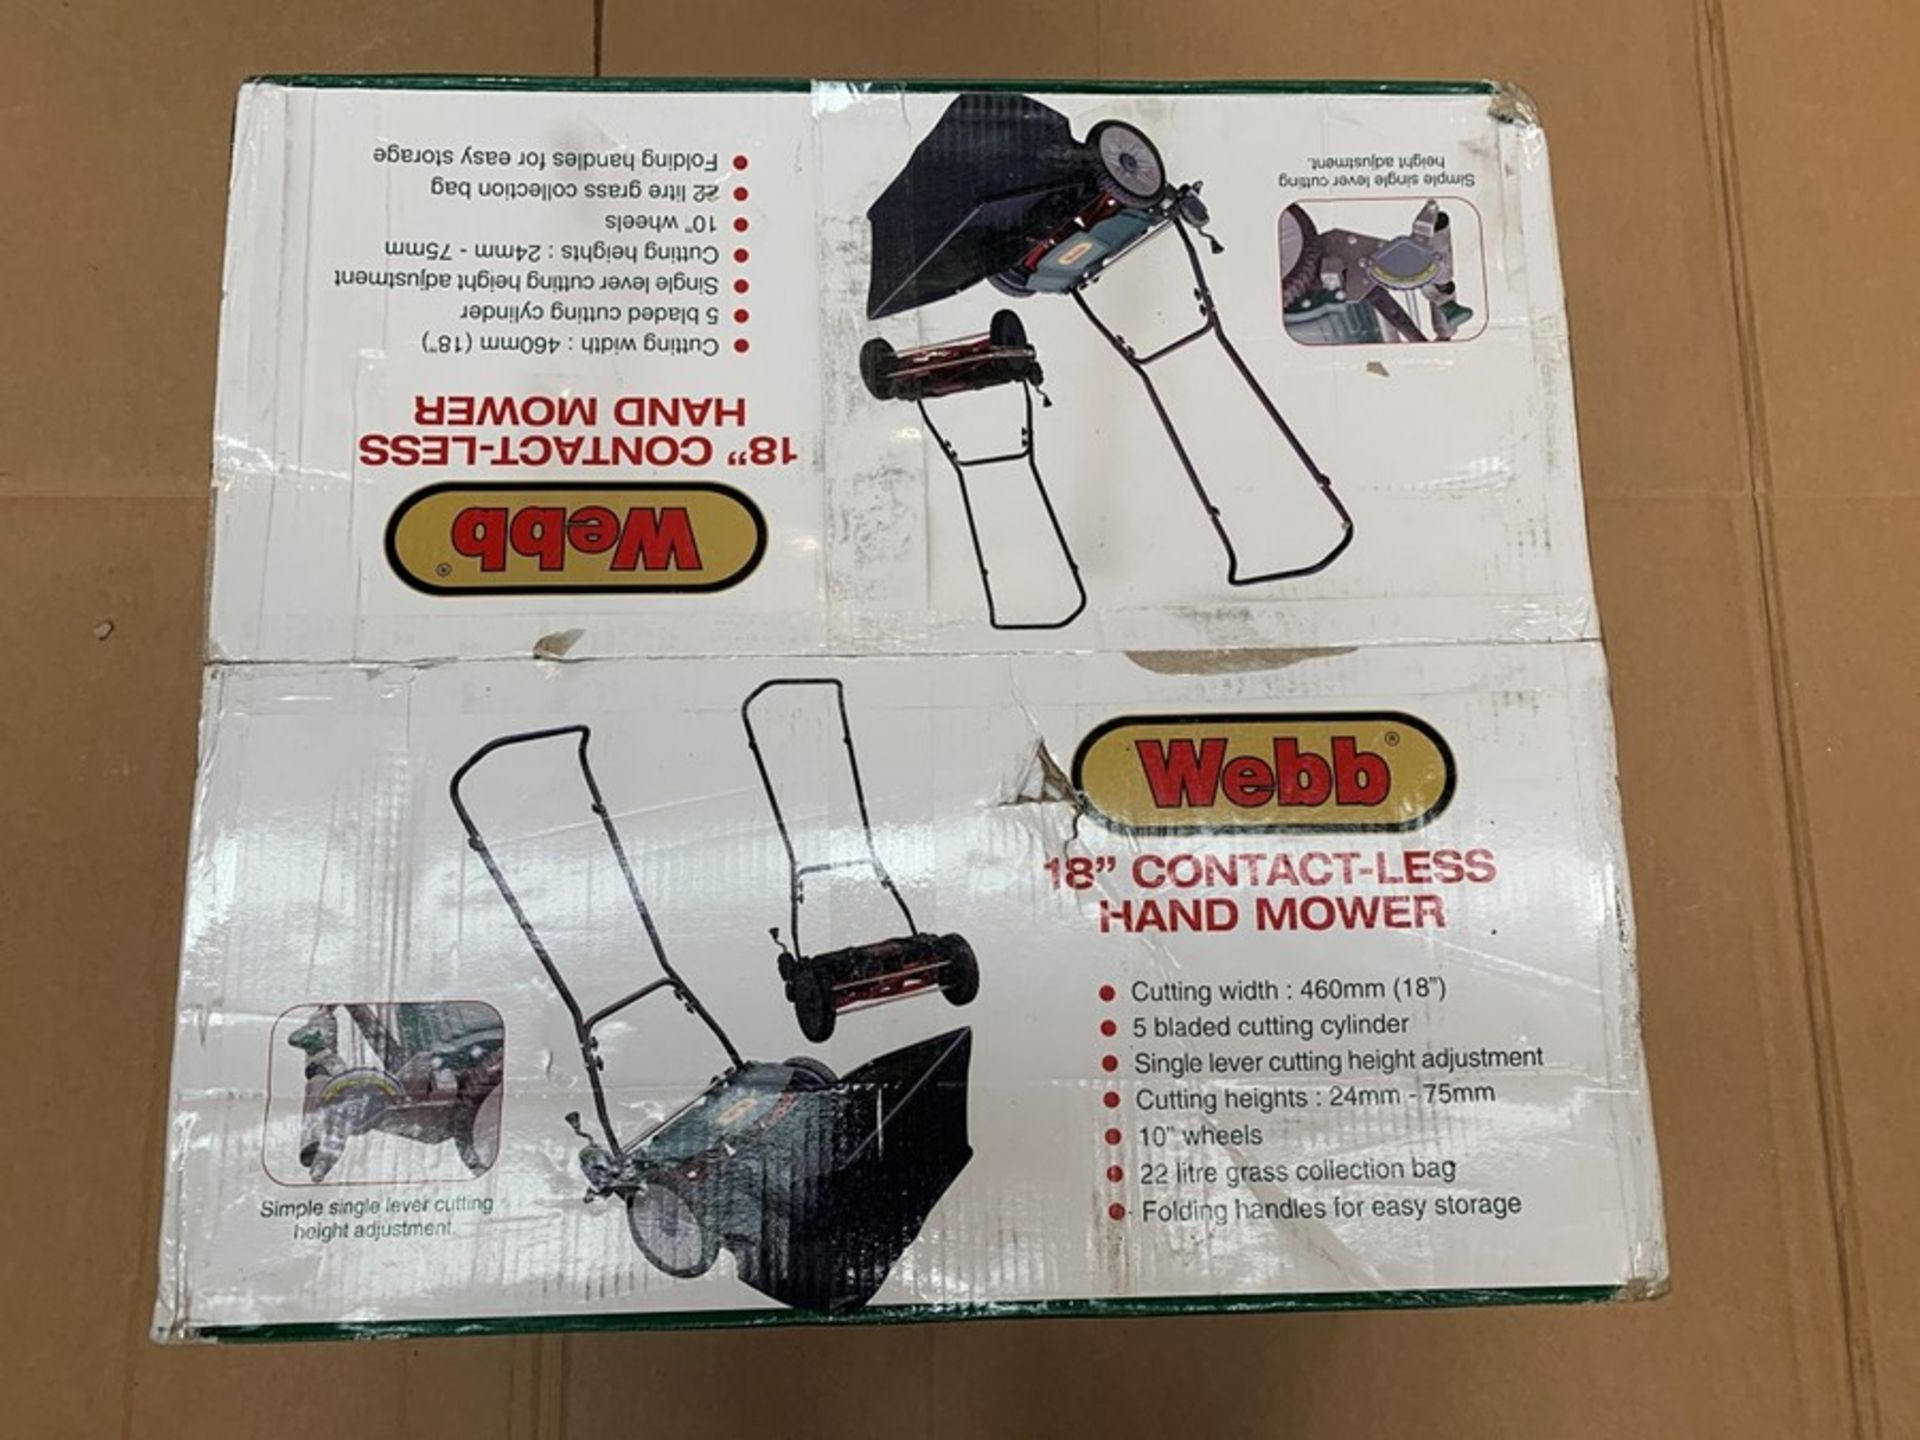 1 BOXED UNTESTED WEBB 18" CONTACTLESS HAND MOWER / RRP £87.99 (PUBLIC VIEWING AVAILABLE)